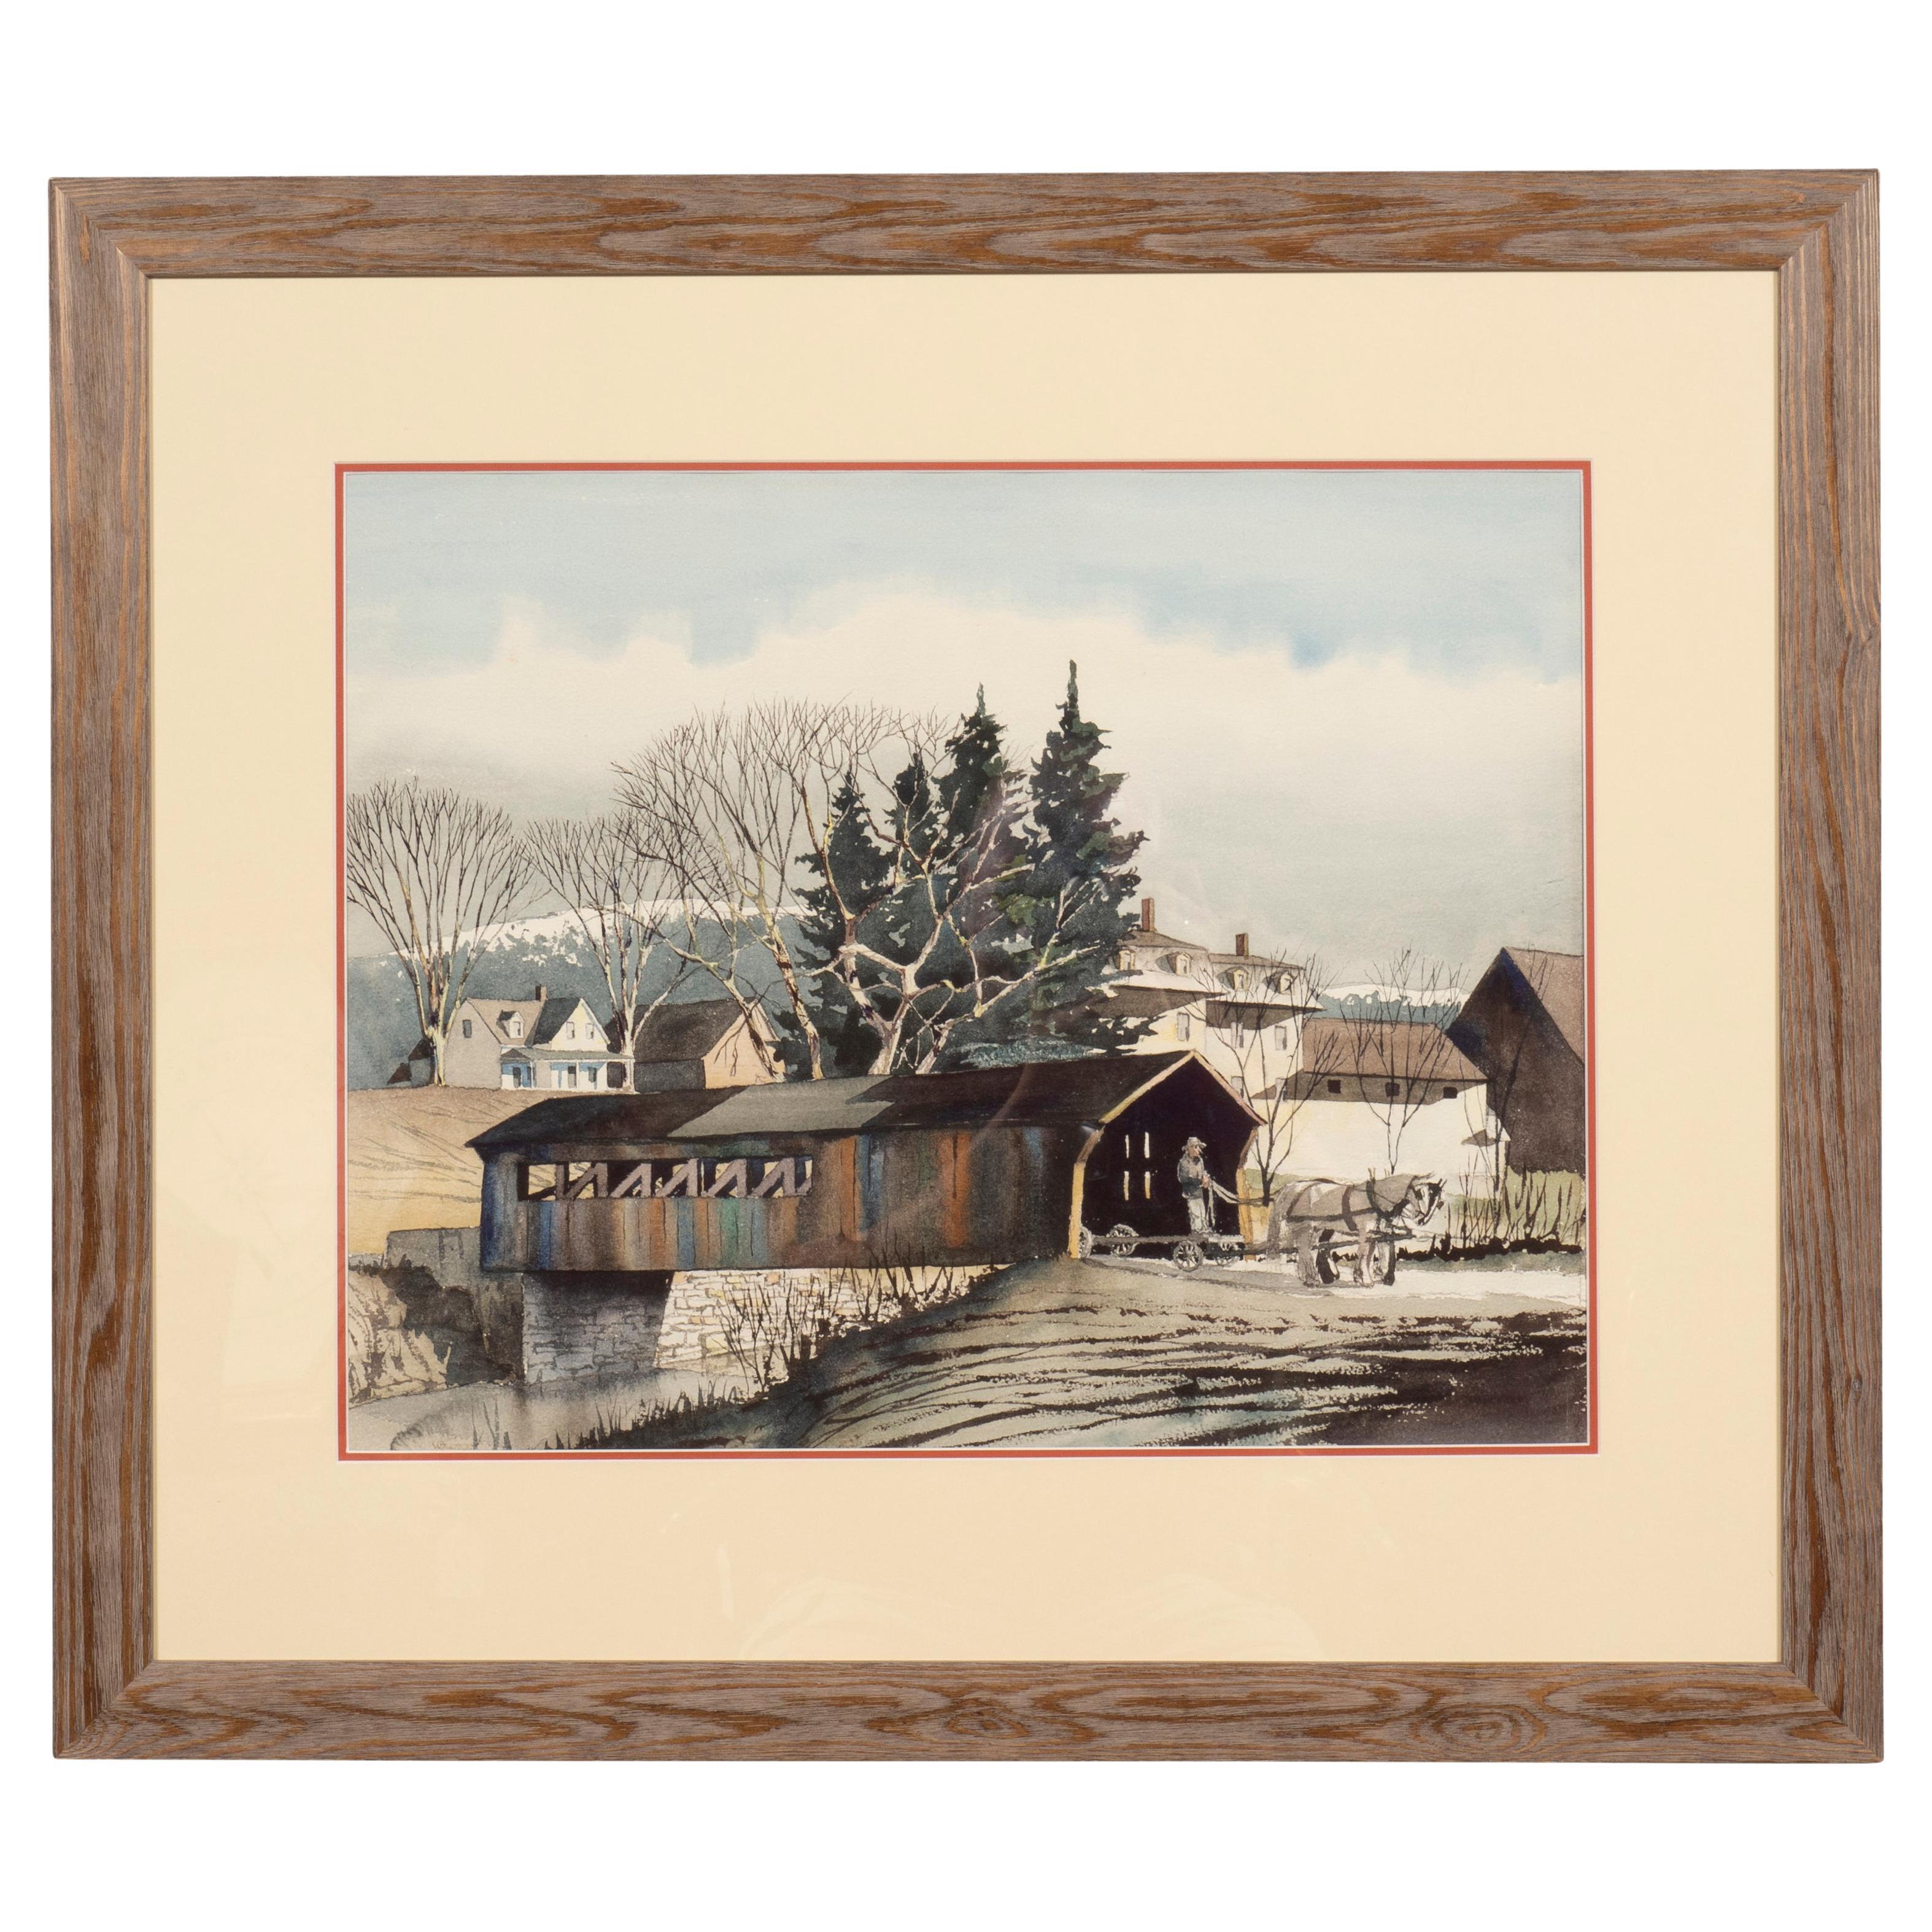 Framed Watercolor Of A Covered Bridge In Moscow Vermont By Walton Blodgett